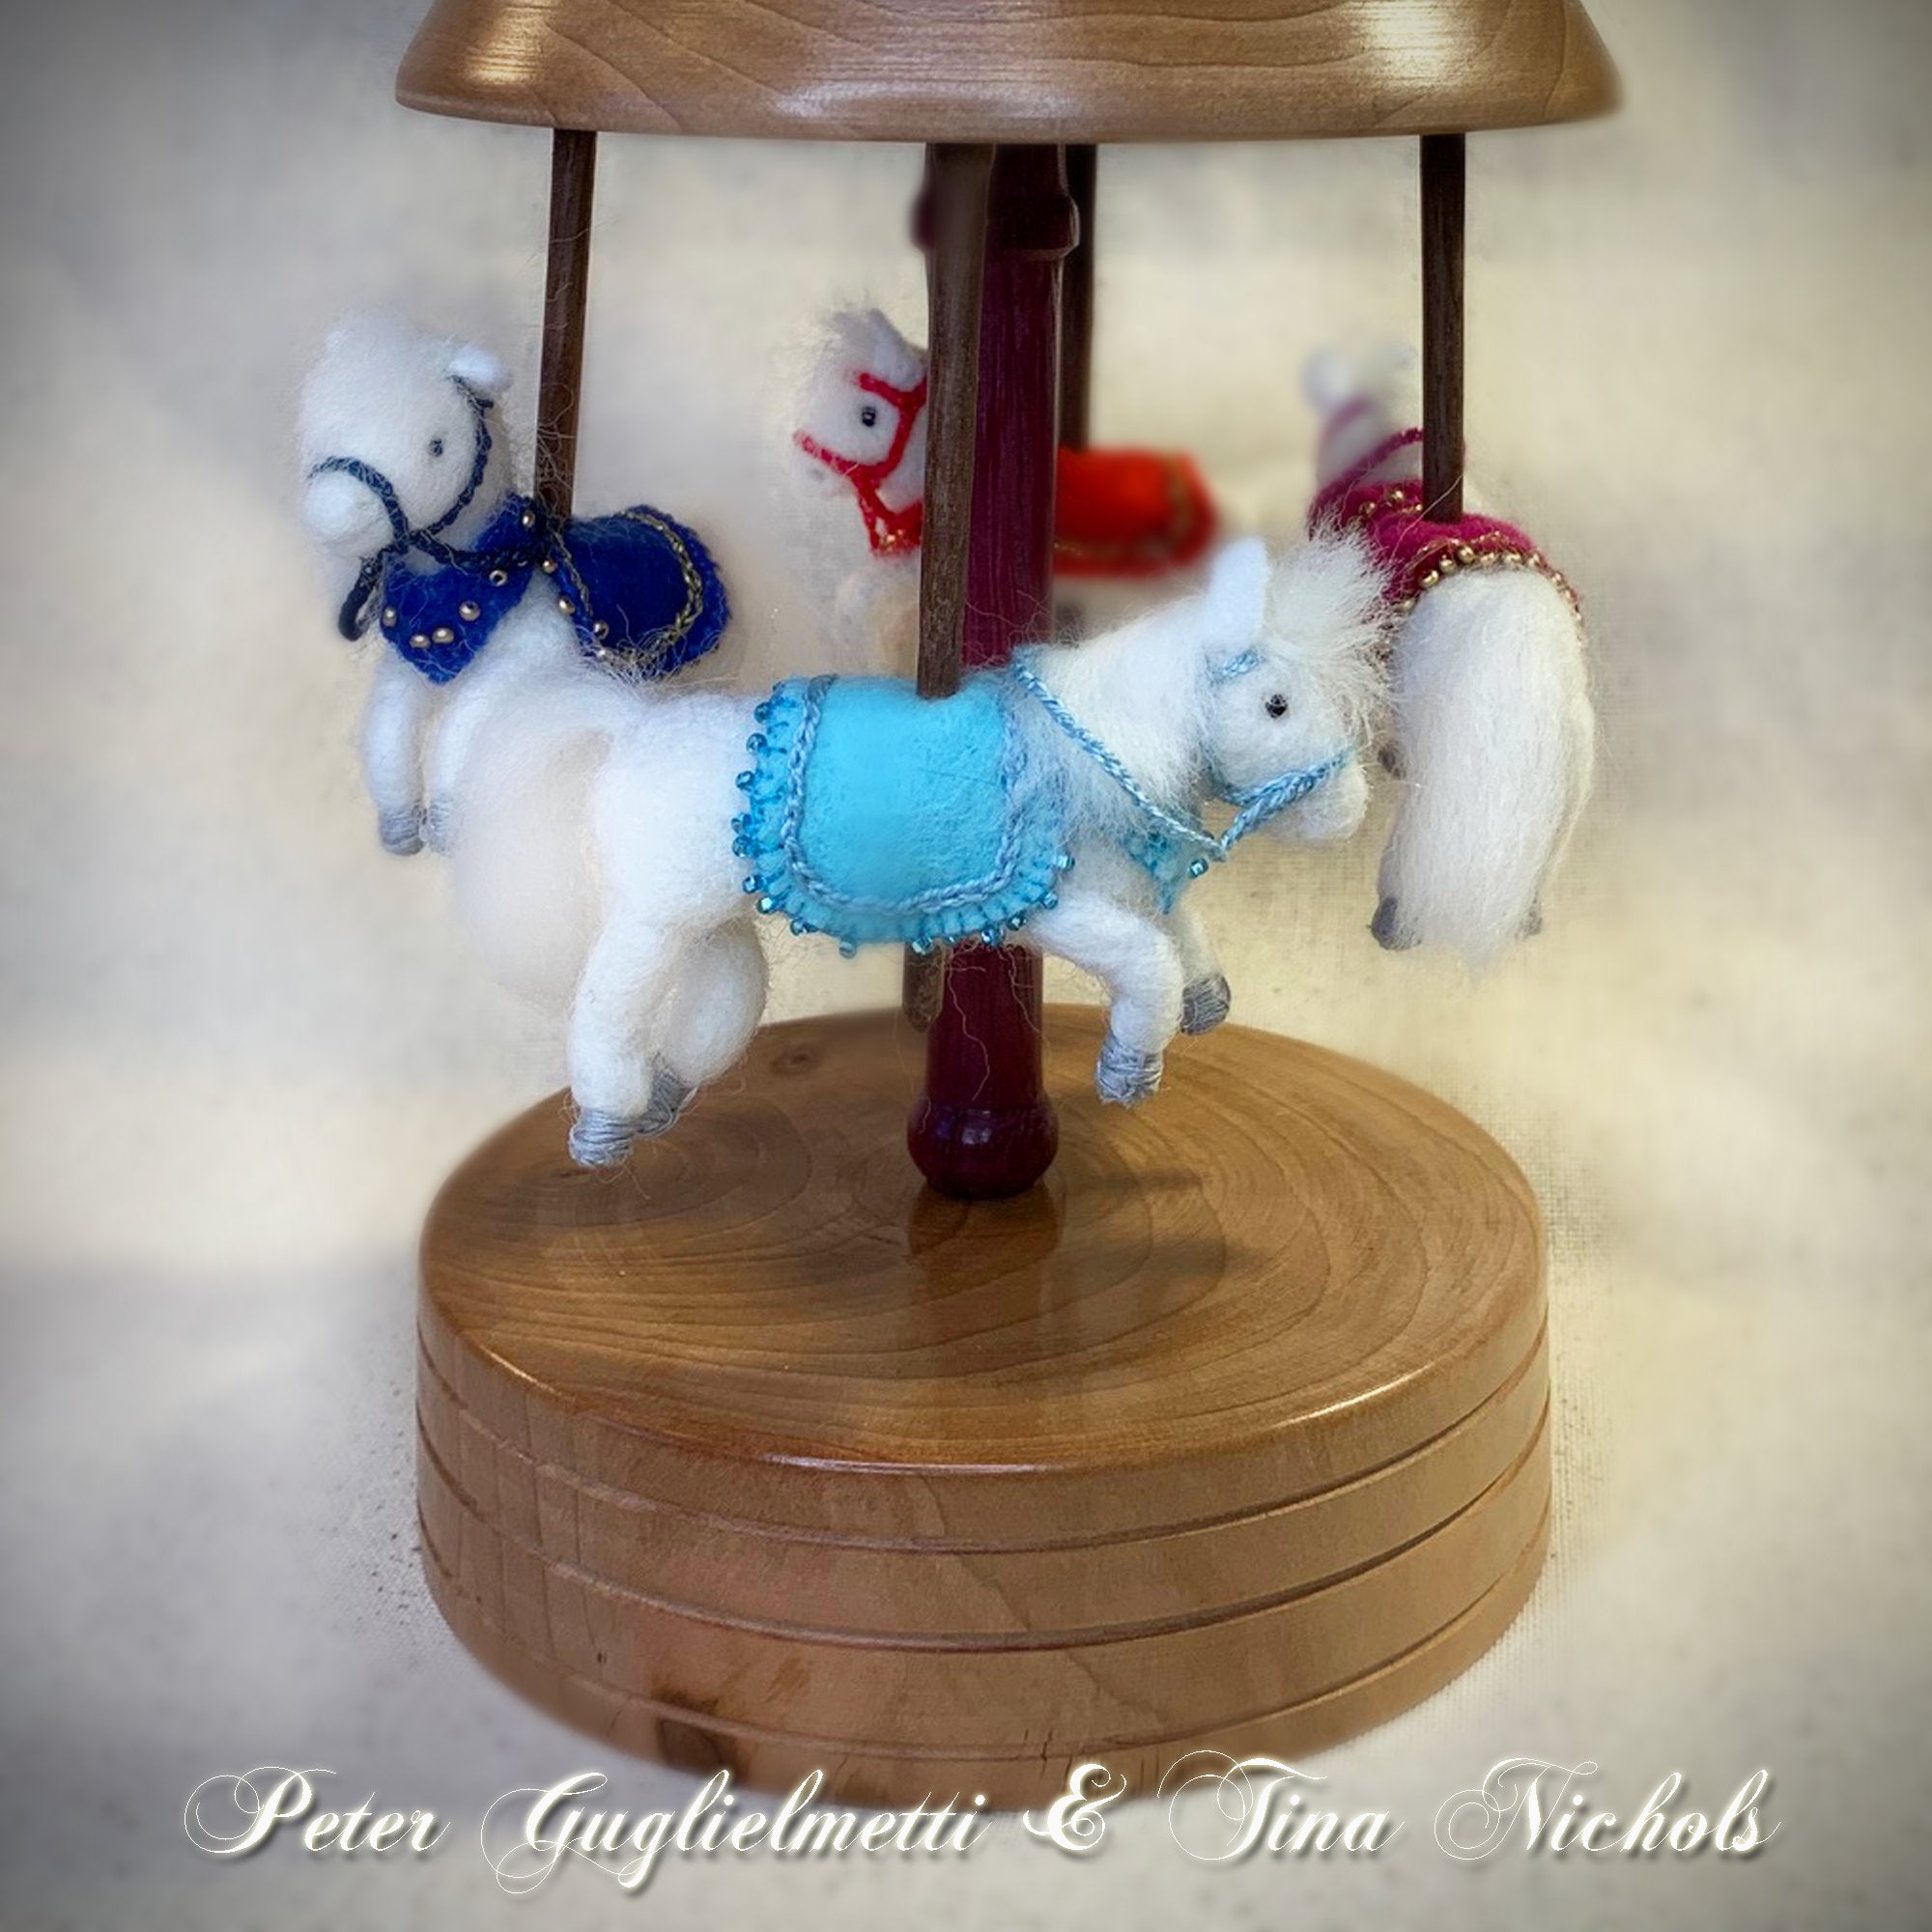 Wooden Carousel with Needle Felted Horses-One-Of-A-Kind Collectible Carousel